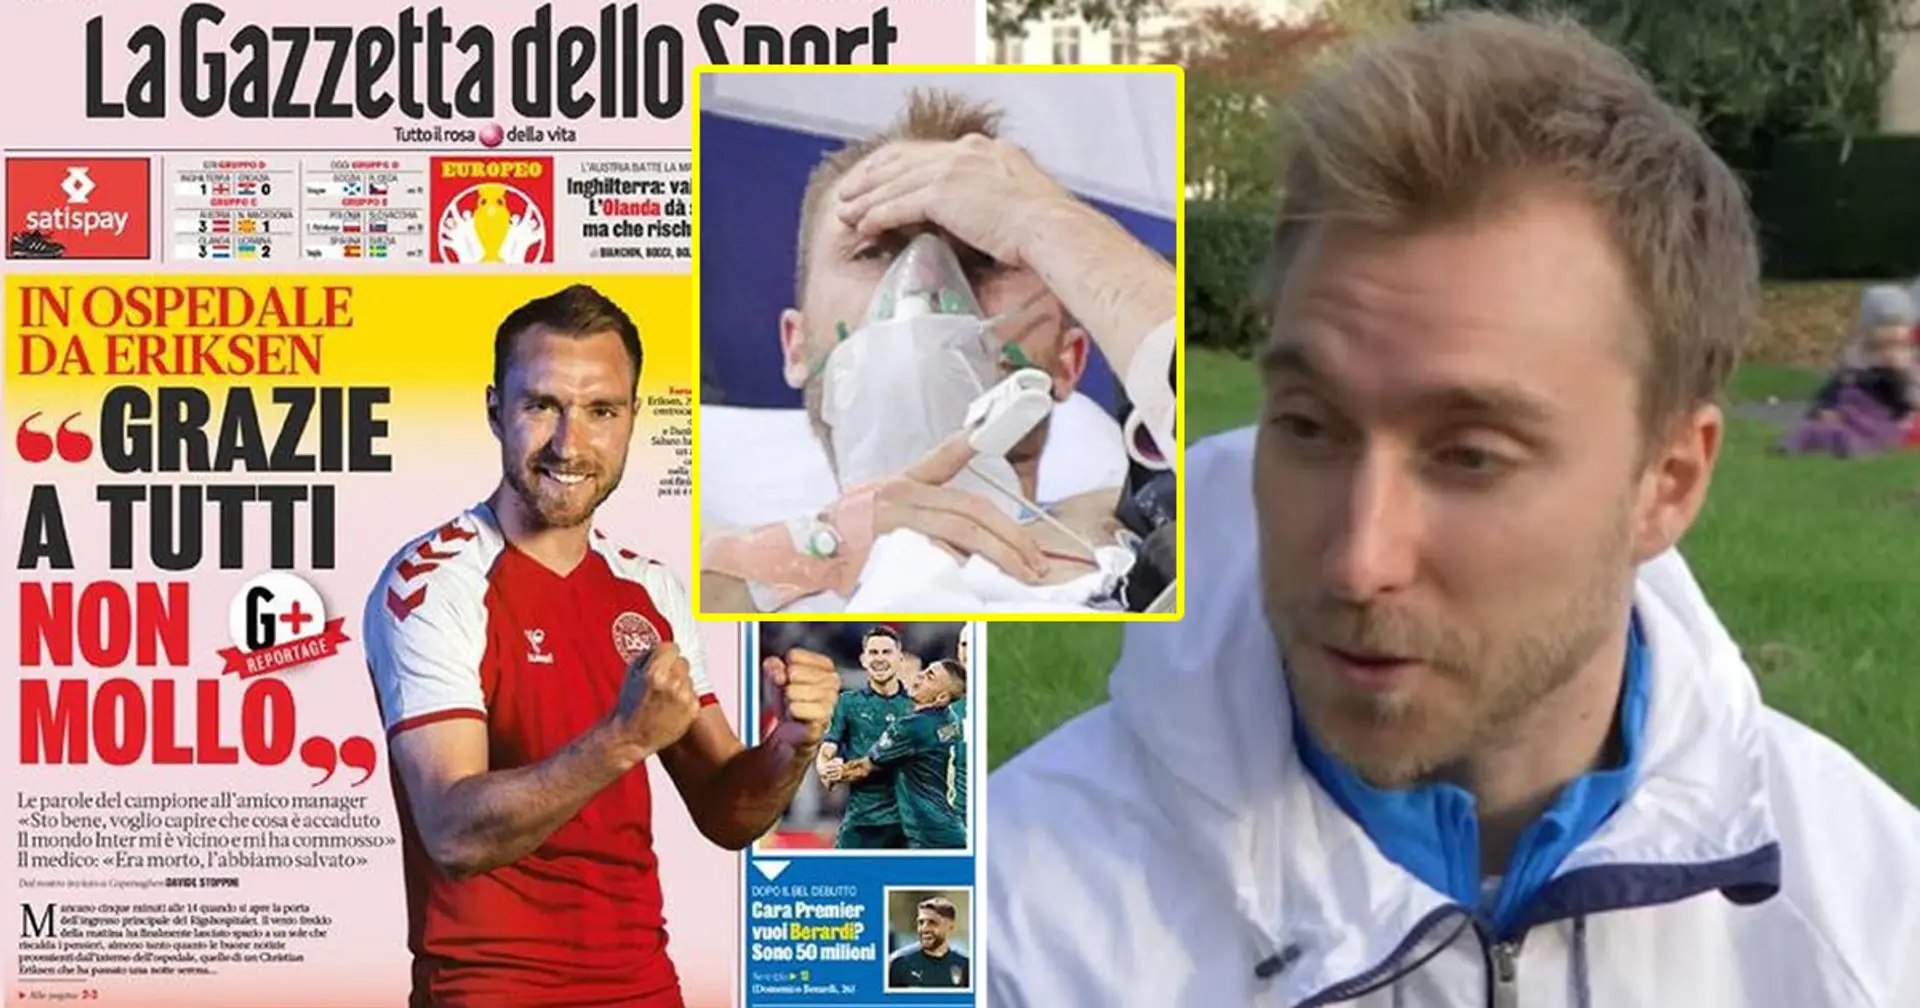 'I want to understand what's happened': Christian Eriksen breaks silence after collapsing on pitch at Euro 2020